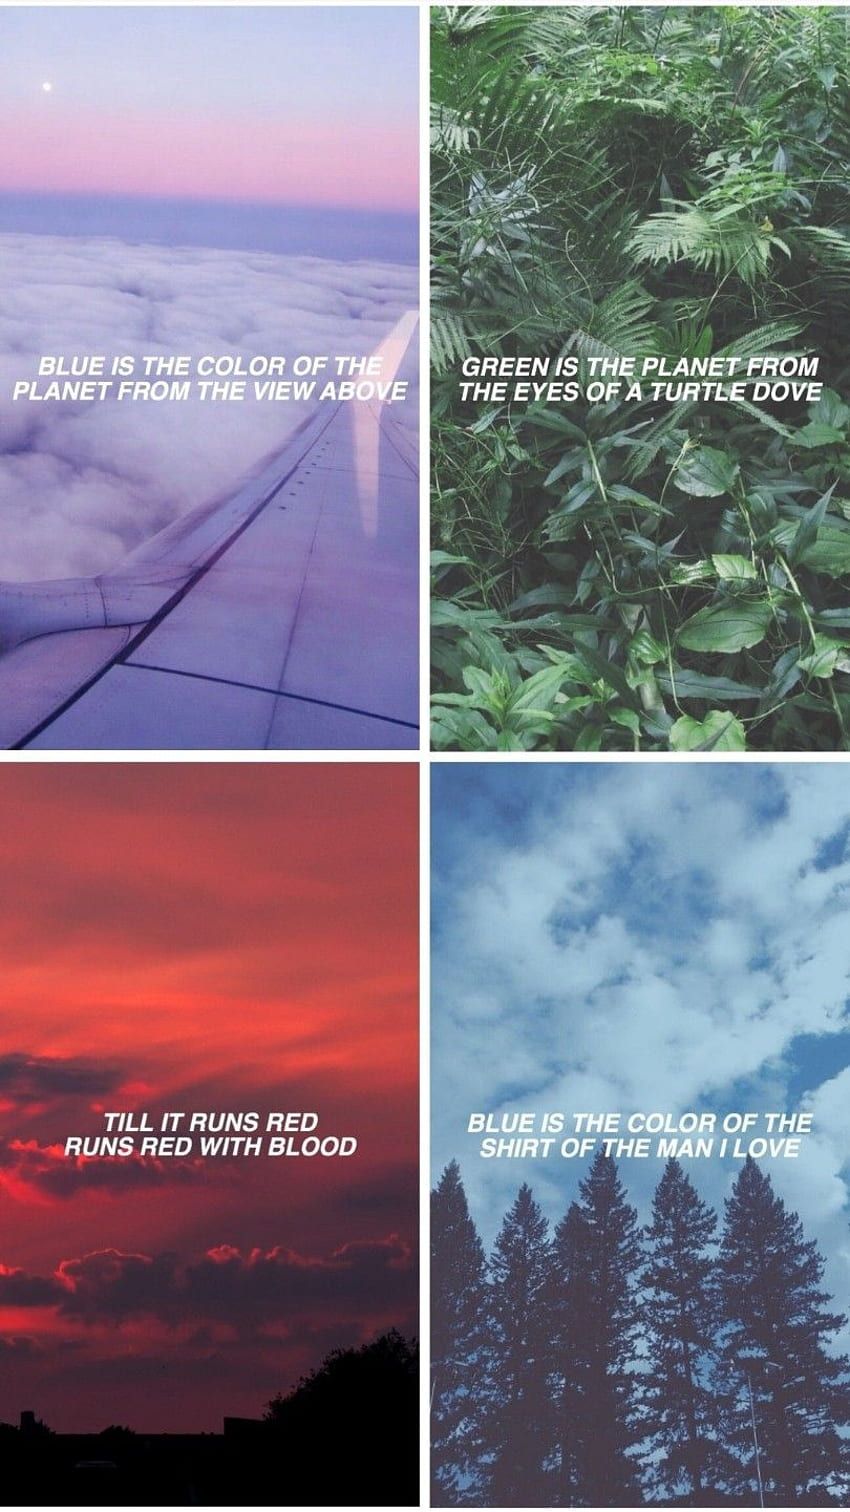 Aesthetic pictures with quotes about the color blue - Lana Del Rey